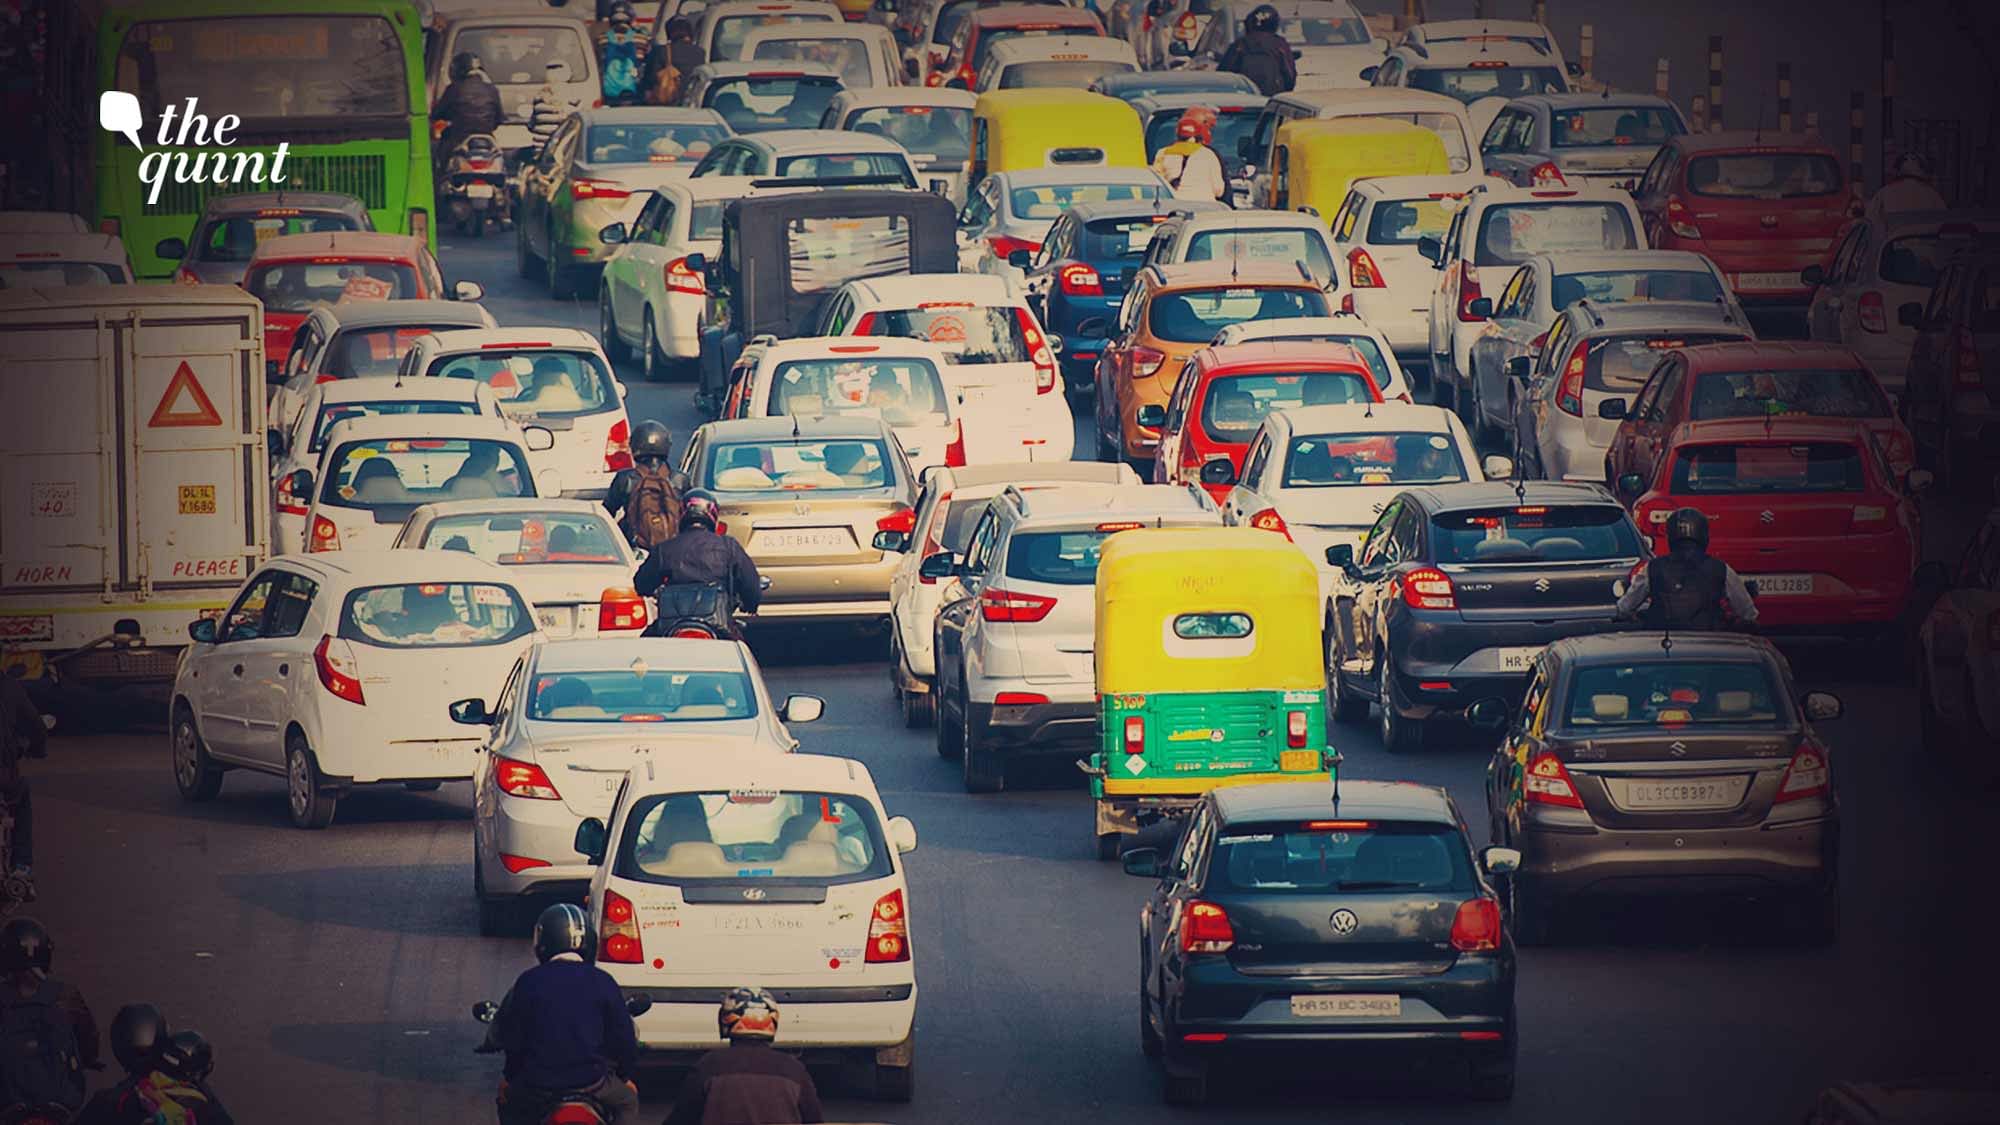 <div class="paragraphs"><p>A study conducted by a <a href="https://www.selectcarleasing.co.uk/news/article/most-least-traffic-jammed-countries">United Kingdom-based company</a> Select Car Leasing shows that an Indian driver spends not merely many tedious hours, but almost two entire days stuck in traffic per year.</p></div>